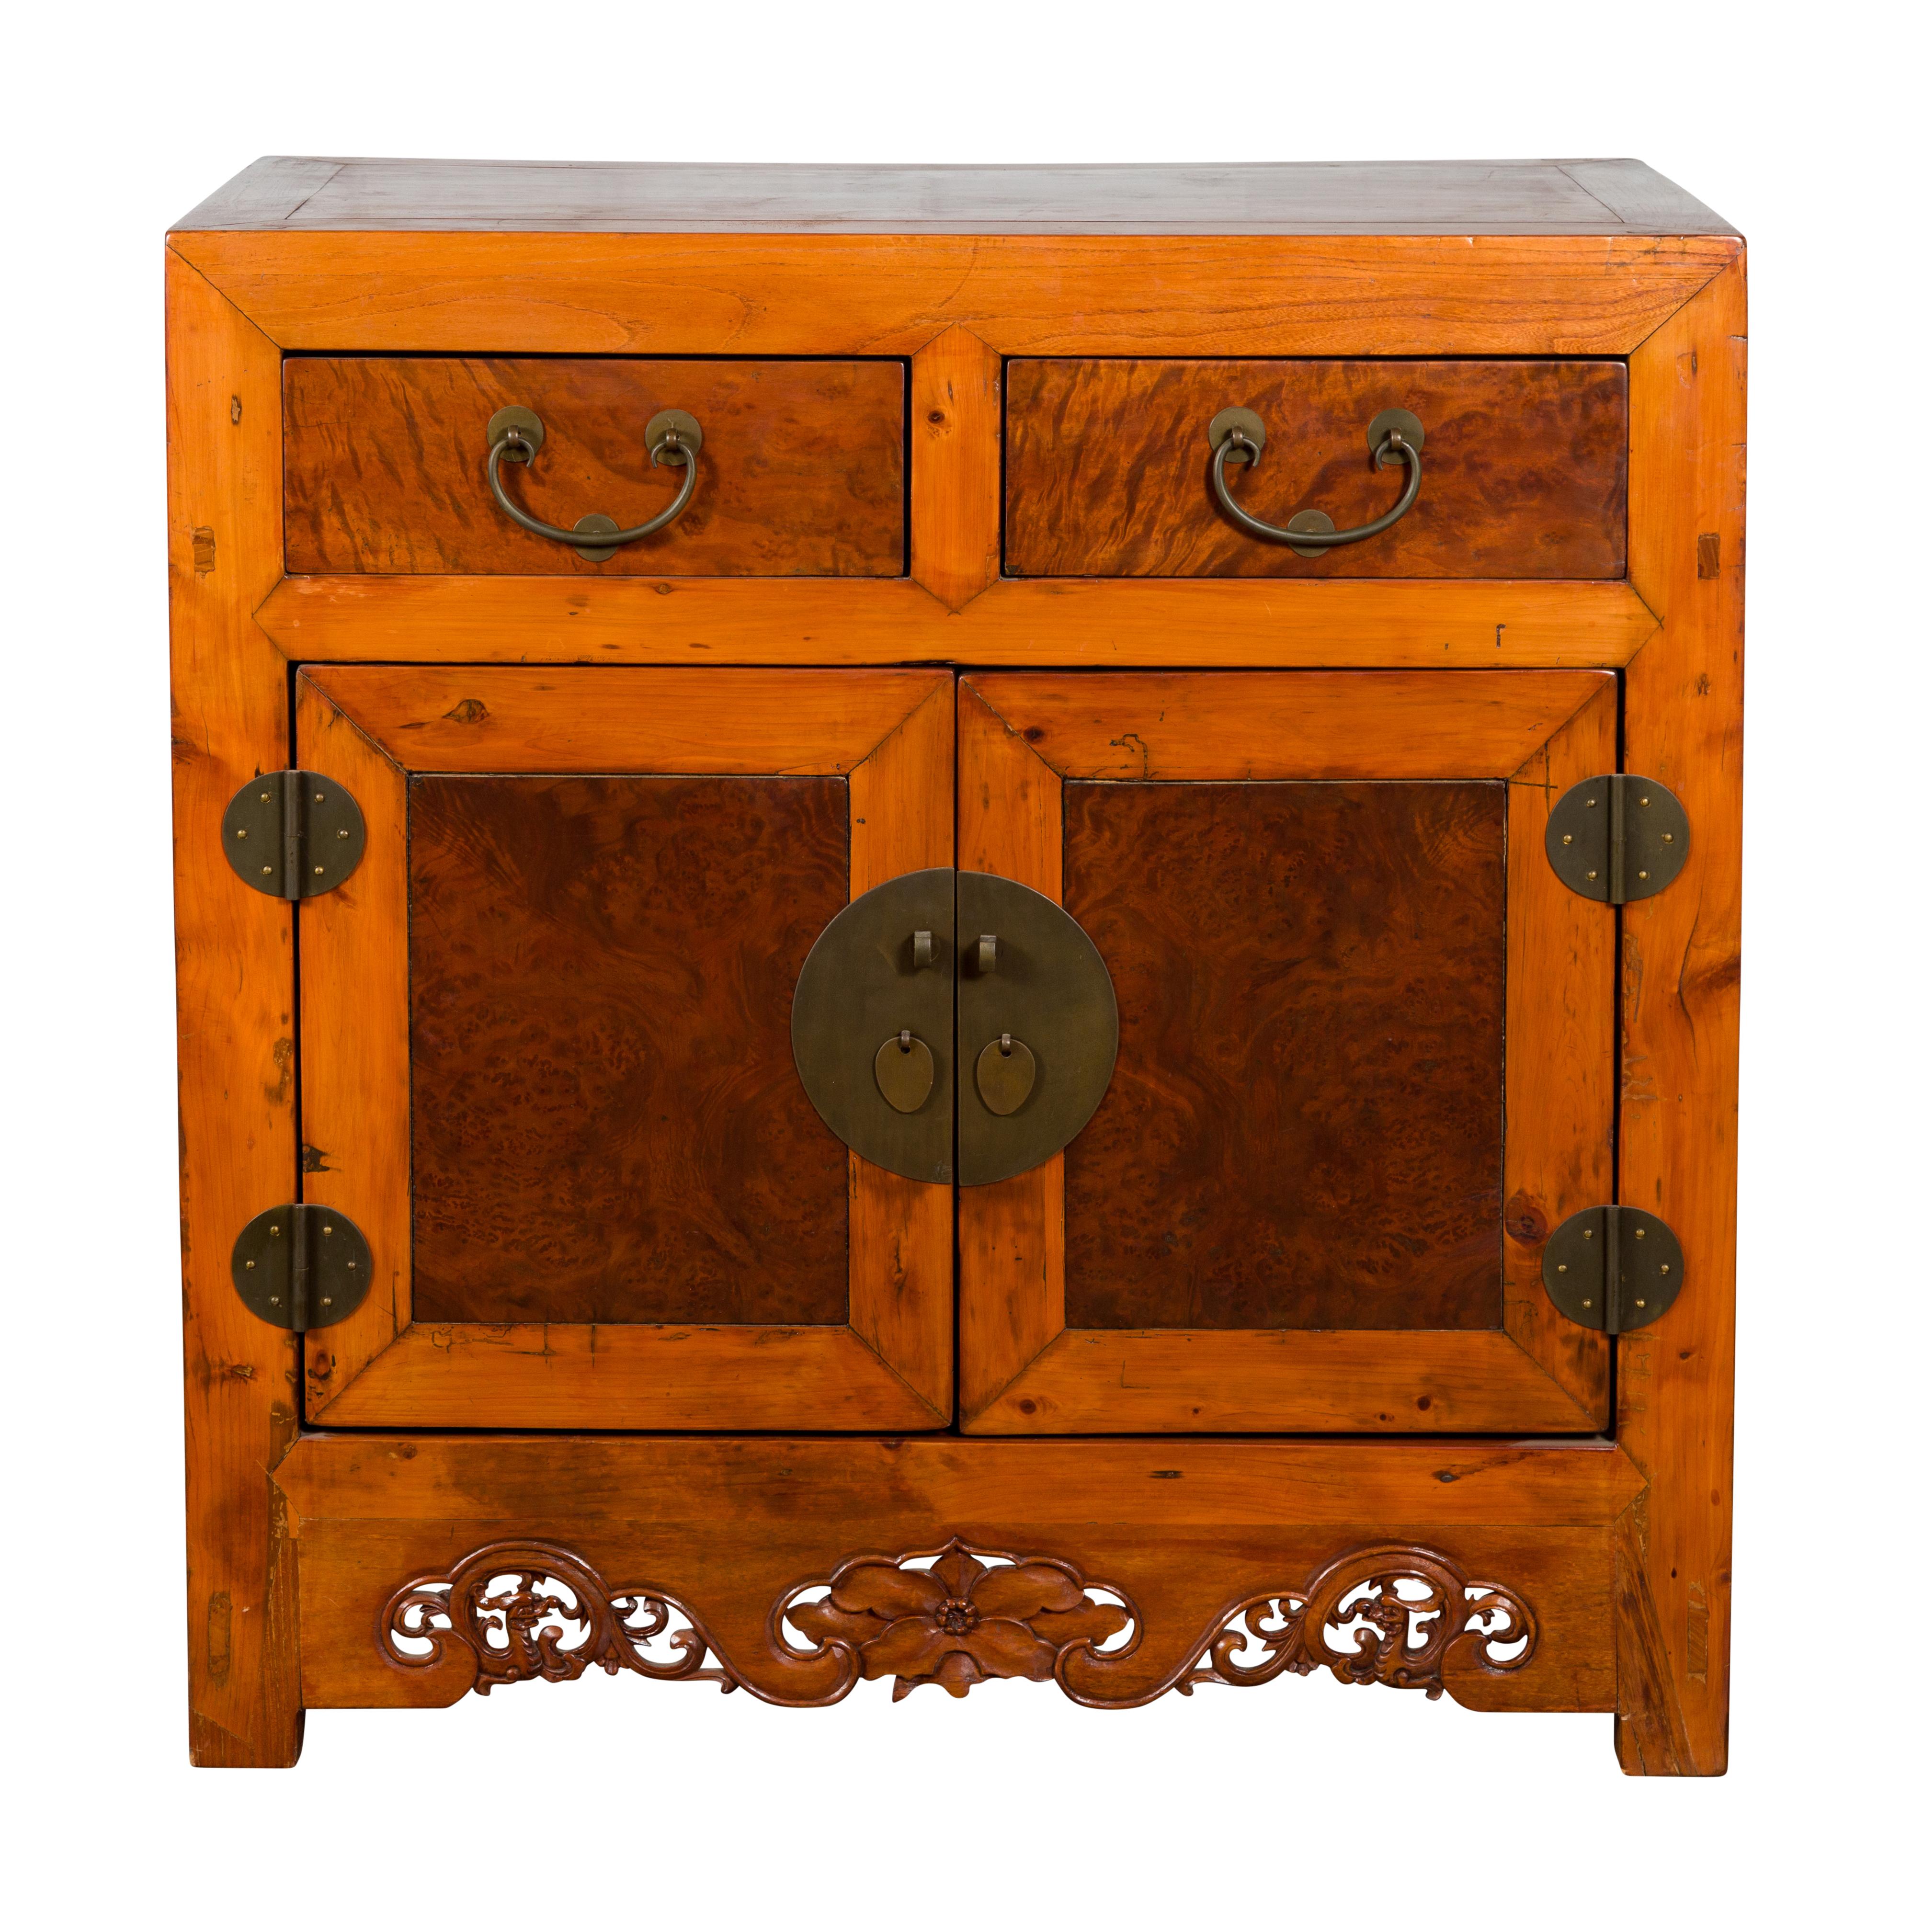 A Chinese Qing Dynasty period two-toned elm wood cabinet from the late 19th century, with dragon and floral carved apron, natural color, burl wood doors and drawers. Created in China during the Qing Dynasty period in the later years of the 19th